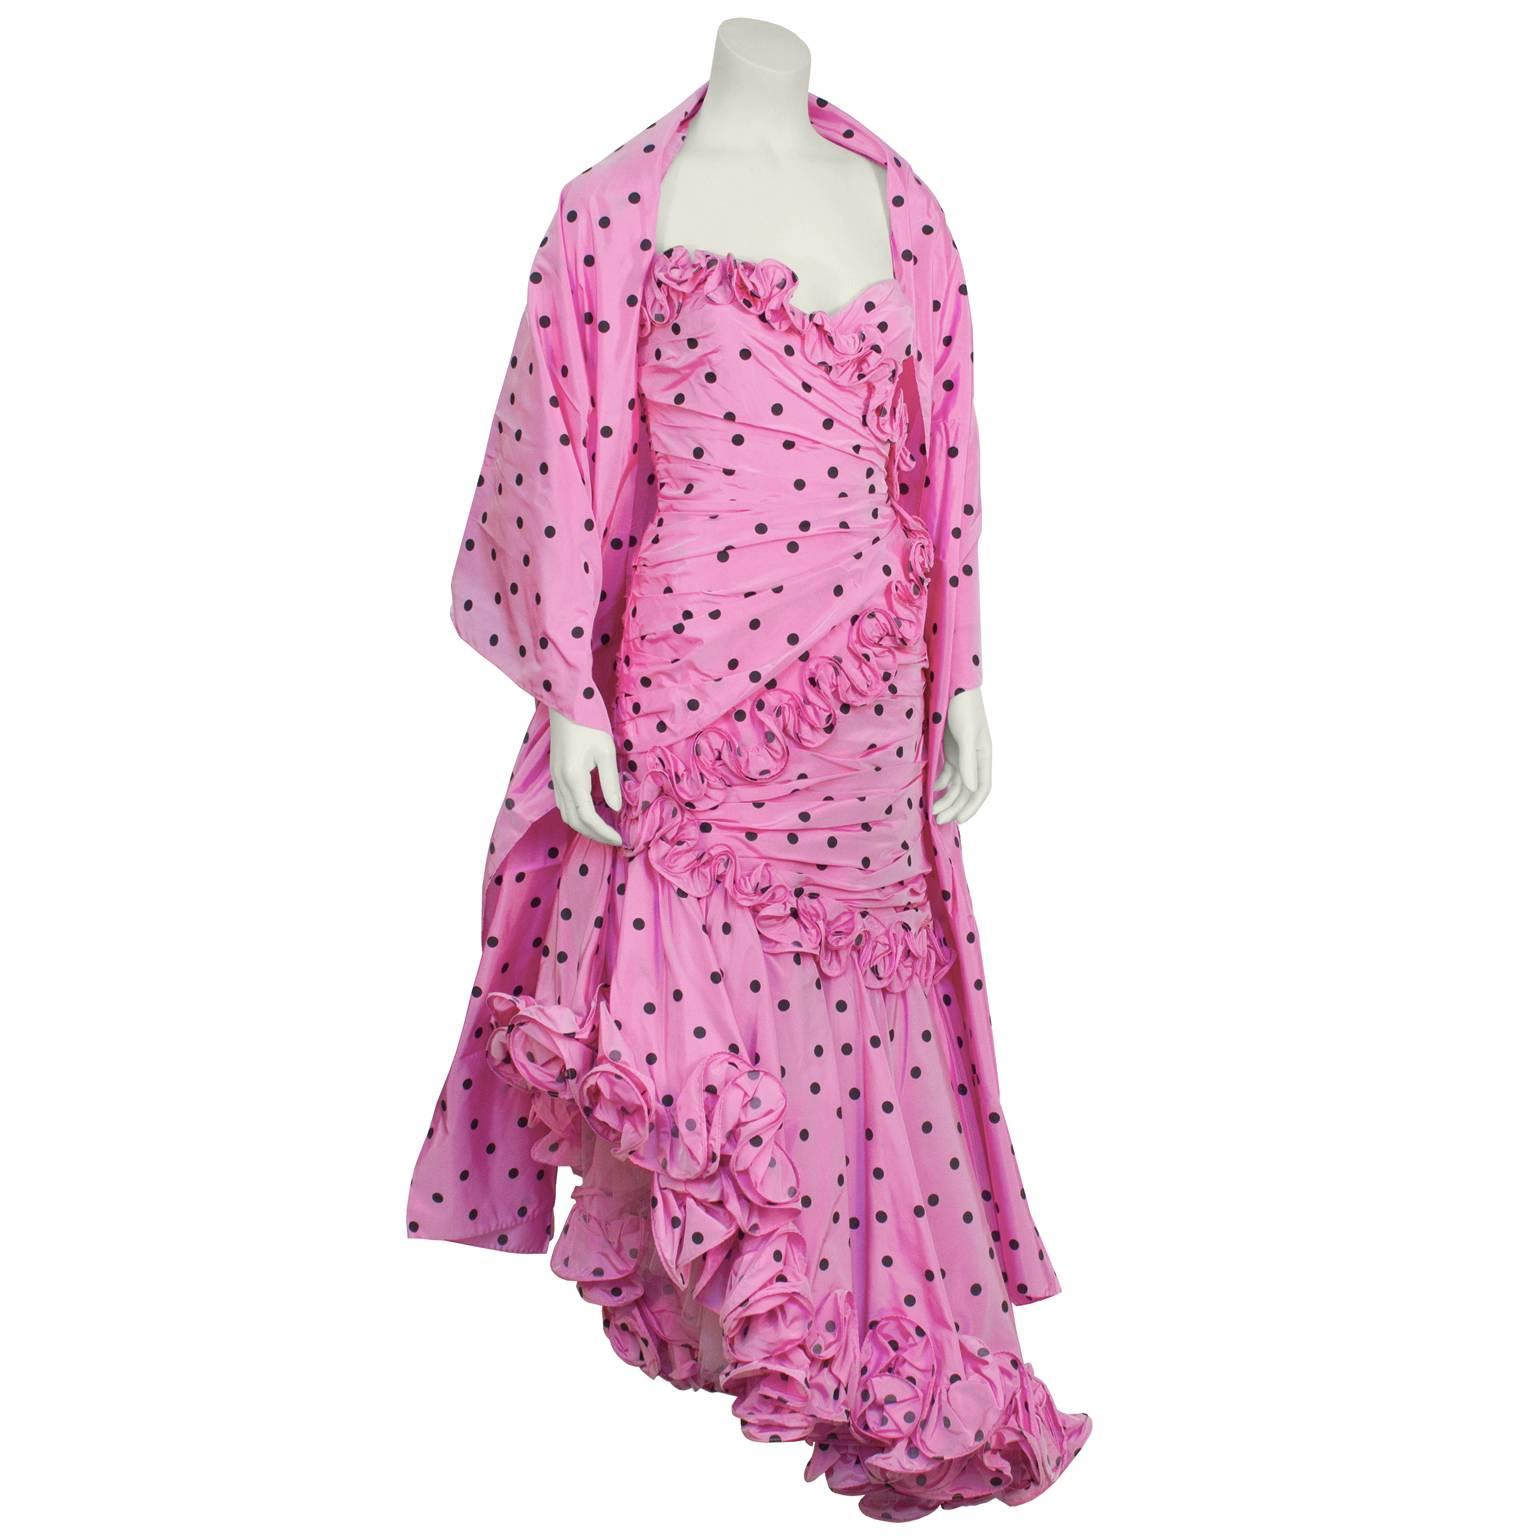 Candice Fraiberger pink and black polka dot ruffle gown from the 1980s.  Known as one of Elizabeth Taylor's favorite designers, this glamorous strapless gown has ruching on the bodice, rosette like ruffles ascending throughout and an angled